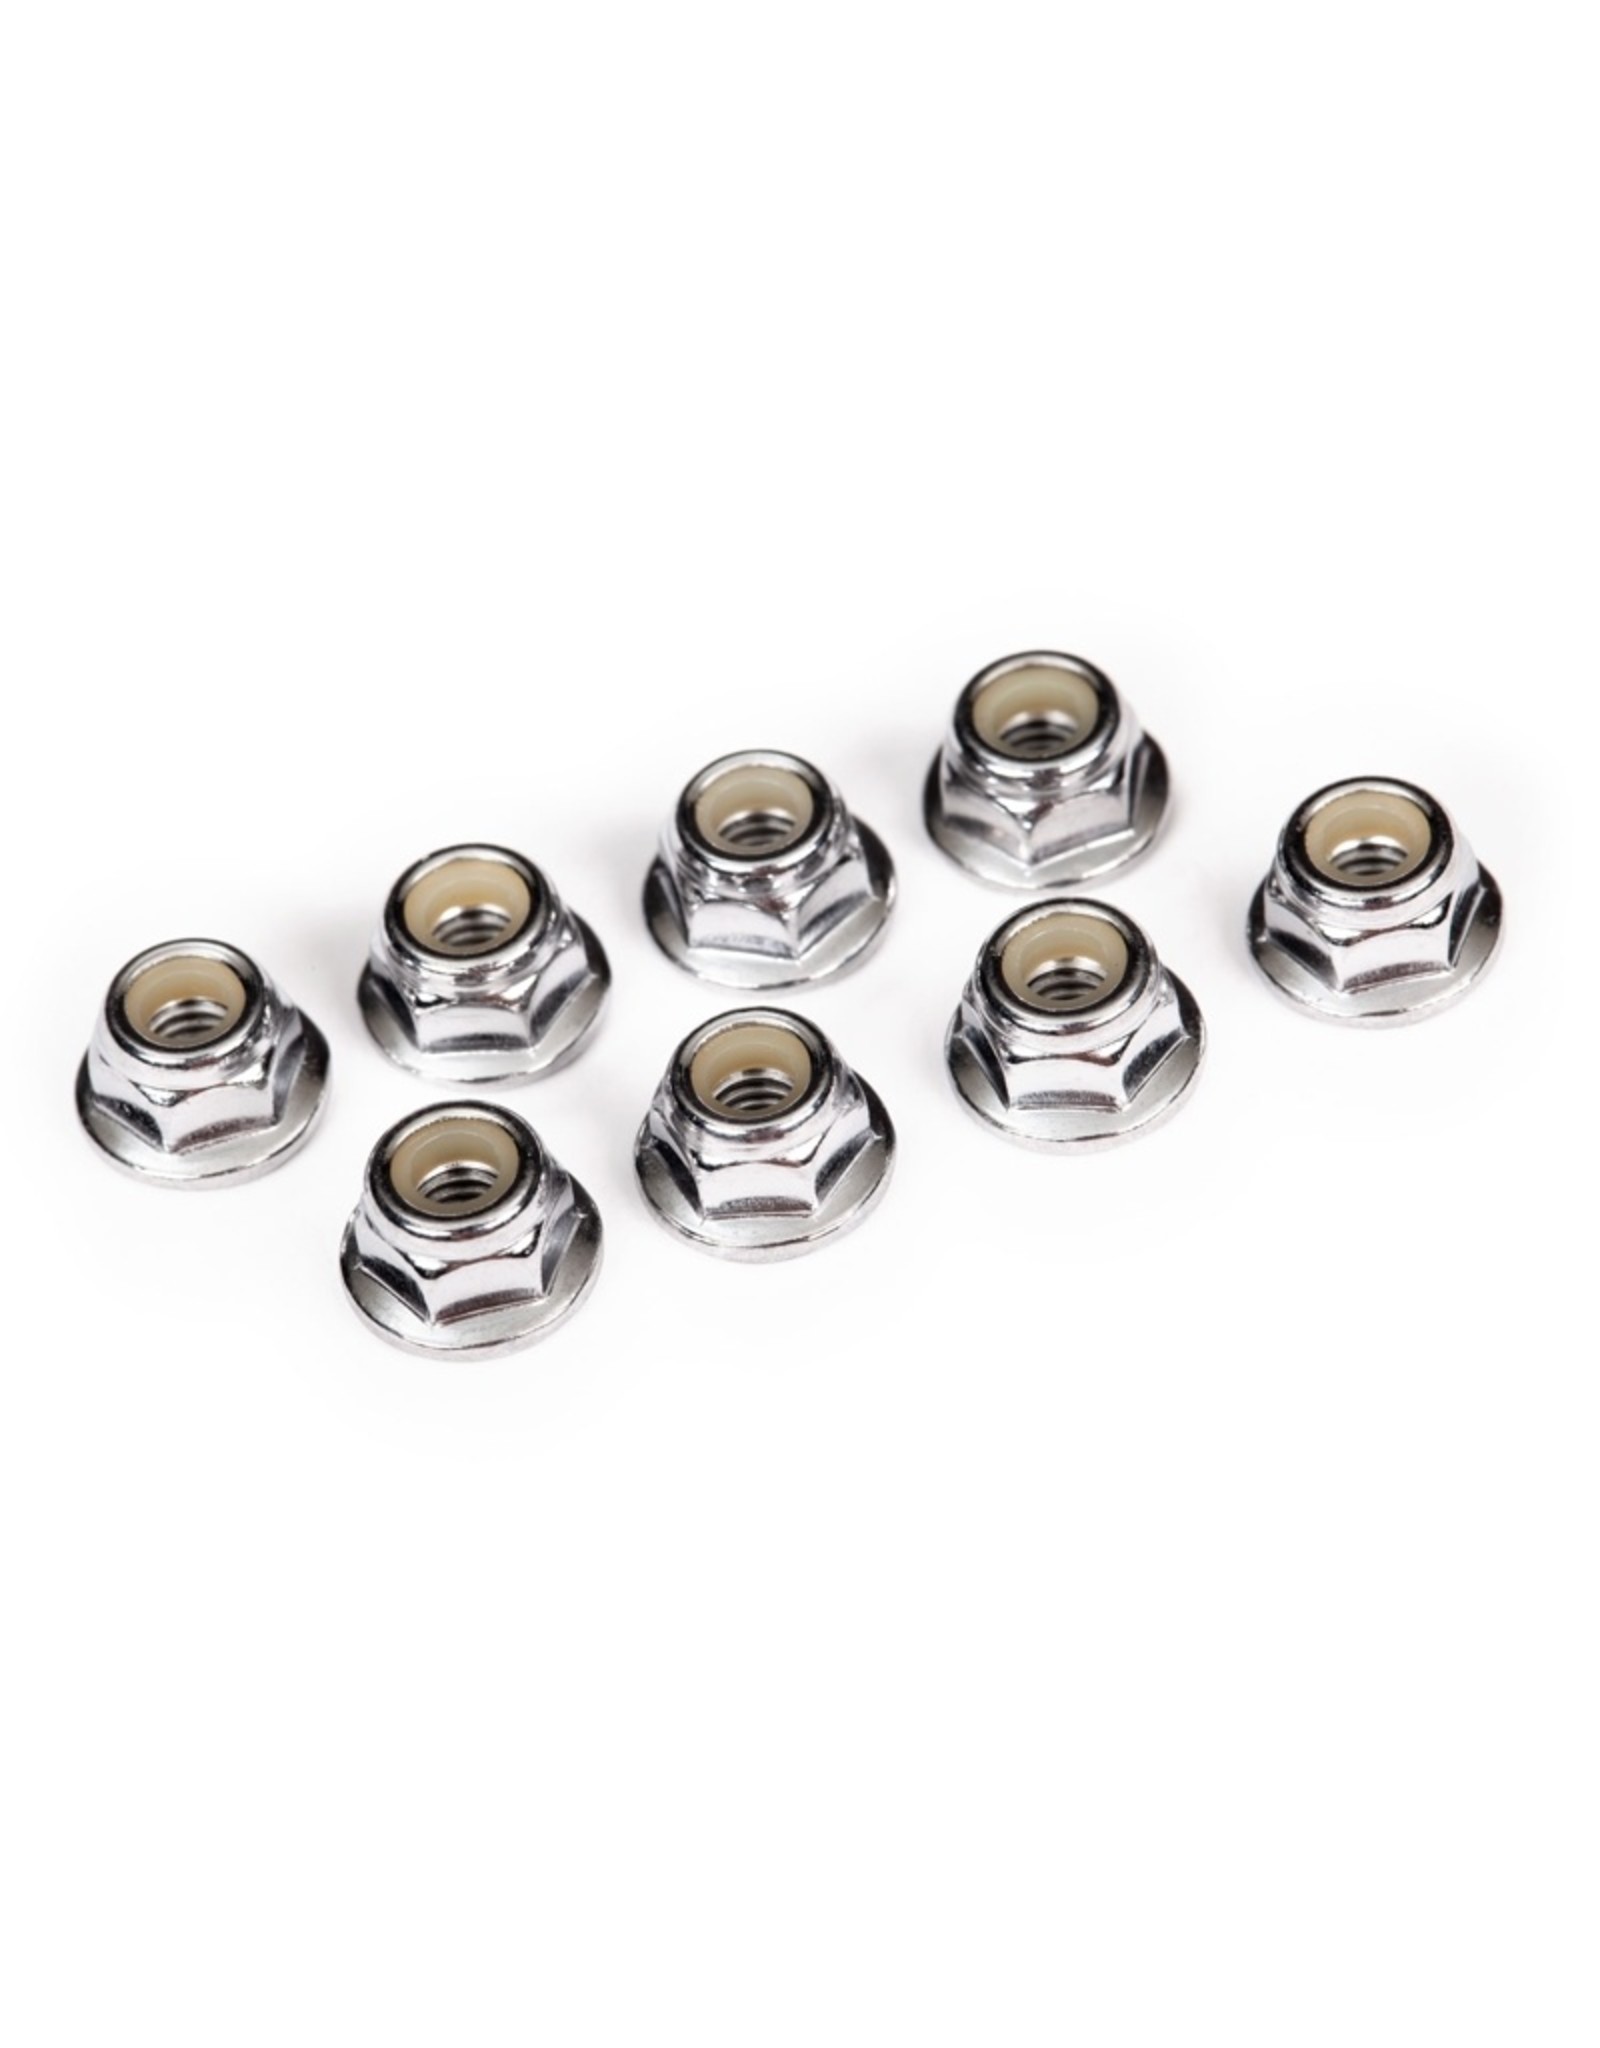 Traxxas TRA3647 4MM FLANGED NYLOCK NUTS (8)